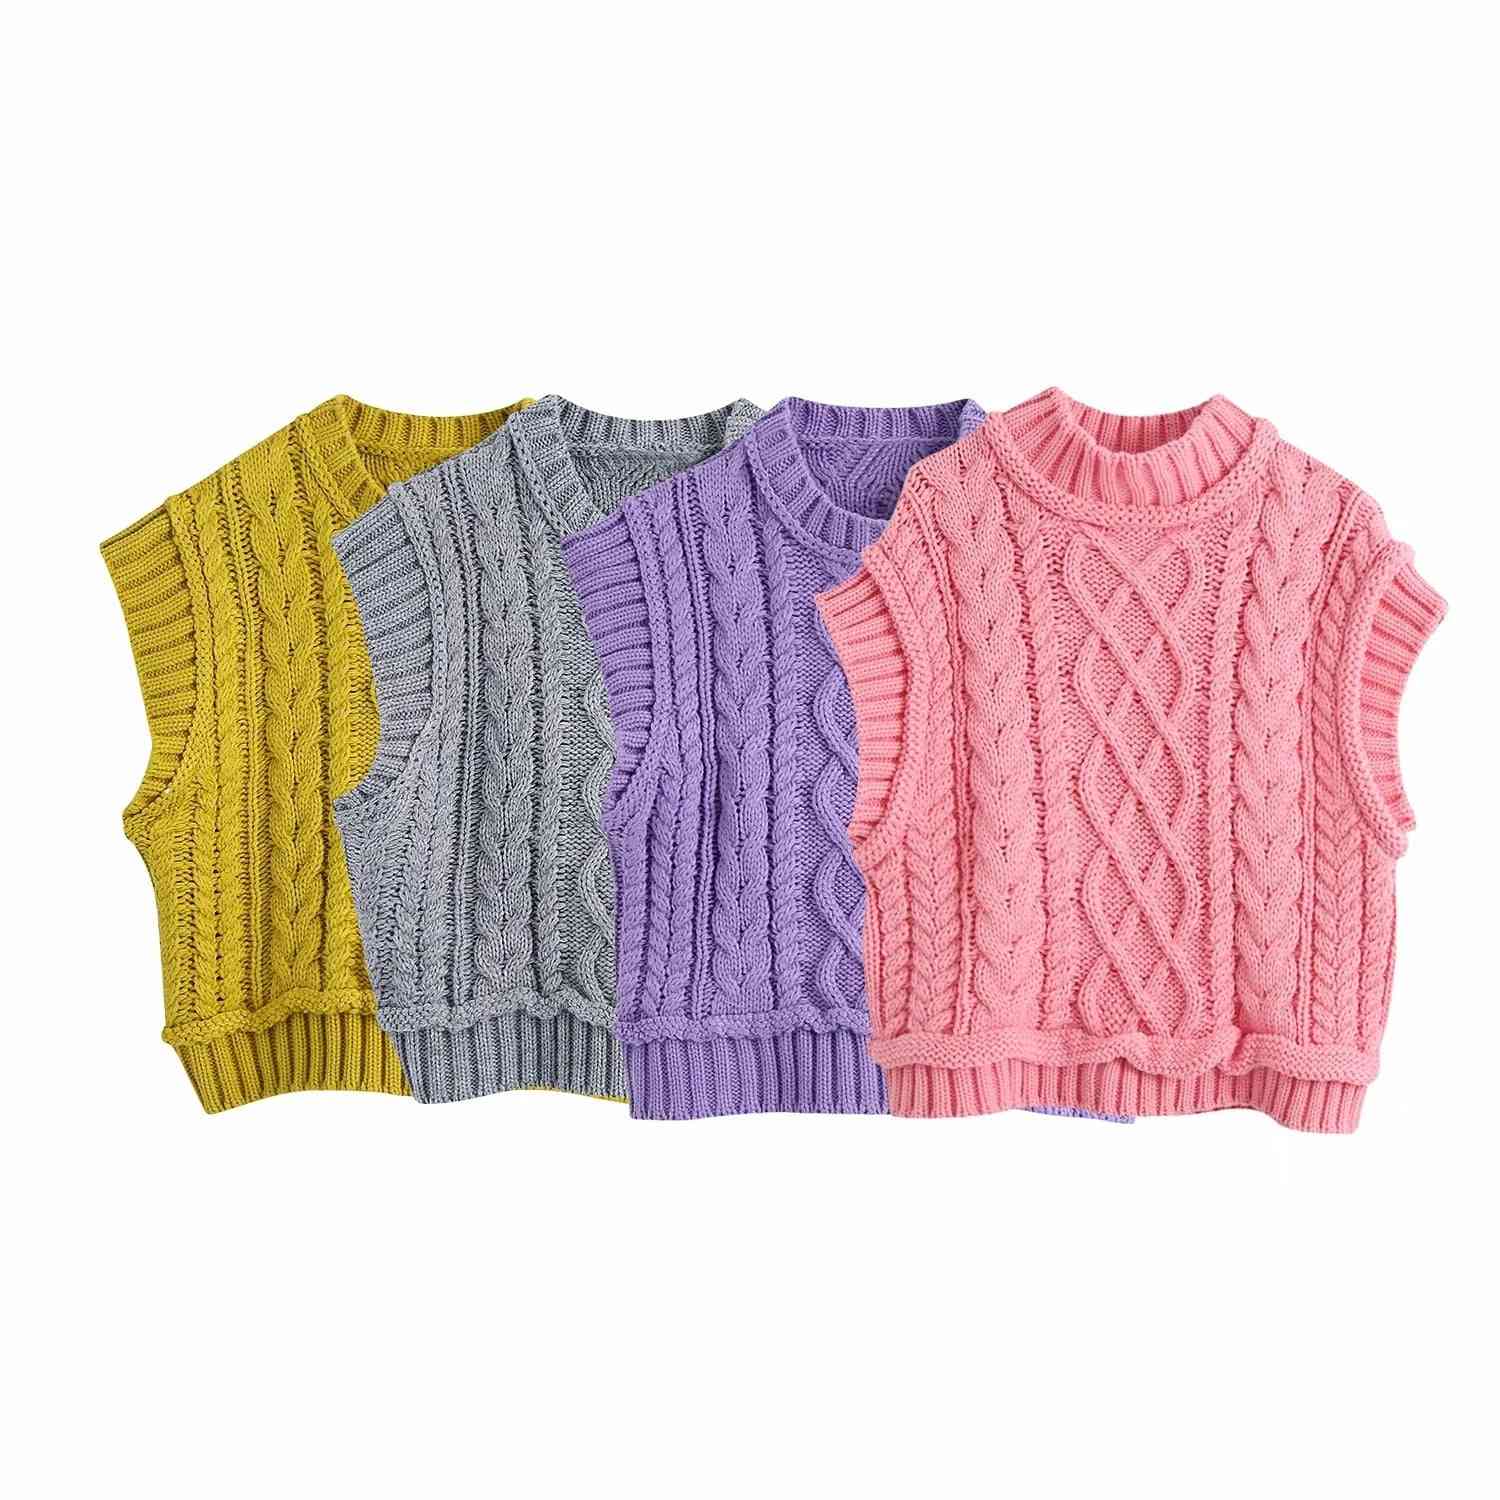 Pretty Sweater Vest, Women Cable Knit Sleeveless Knits Jumper